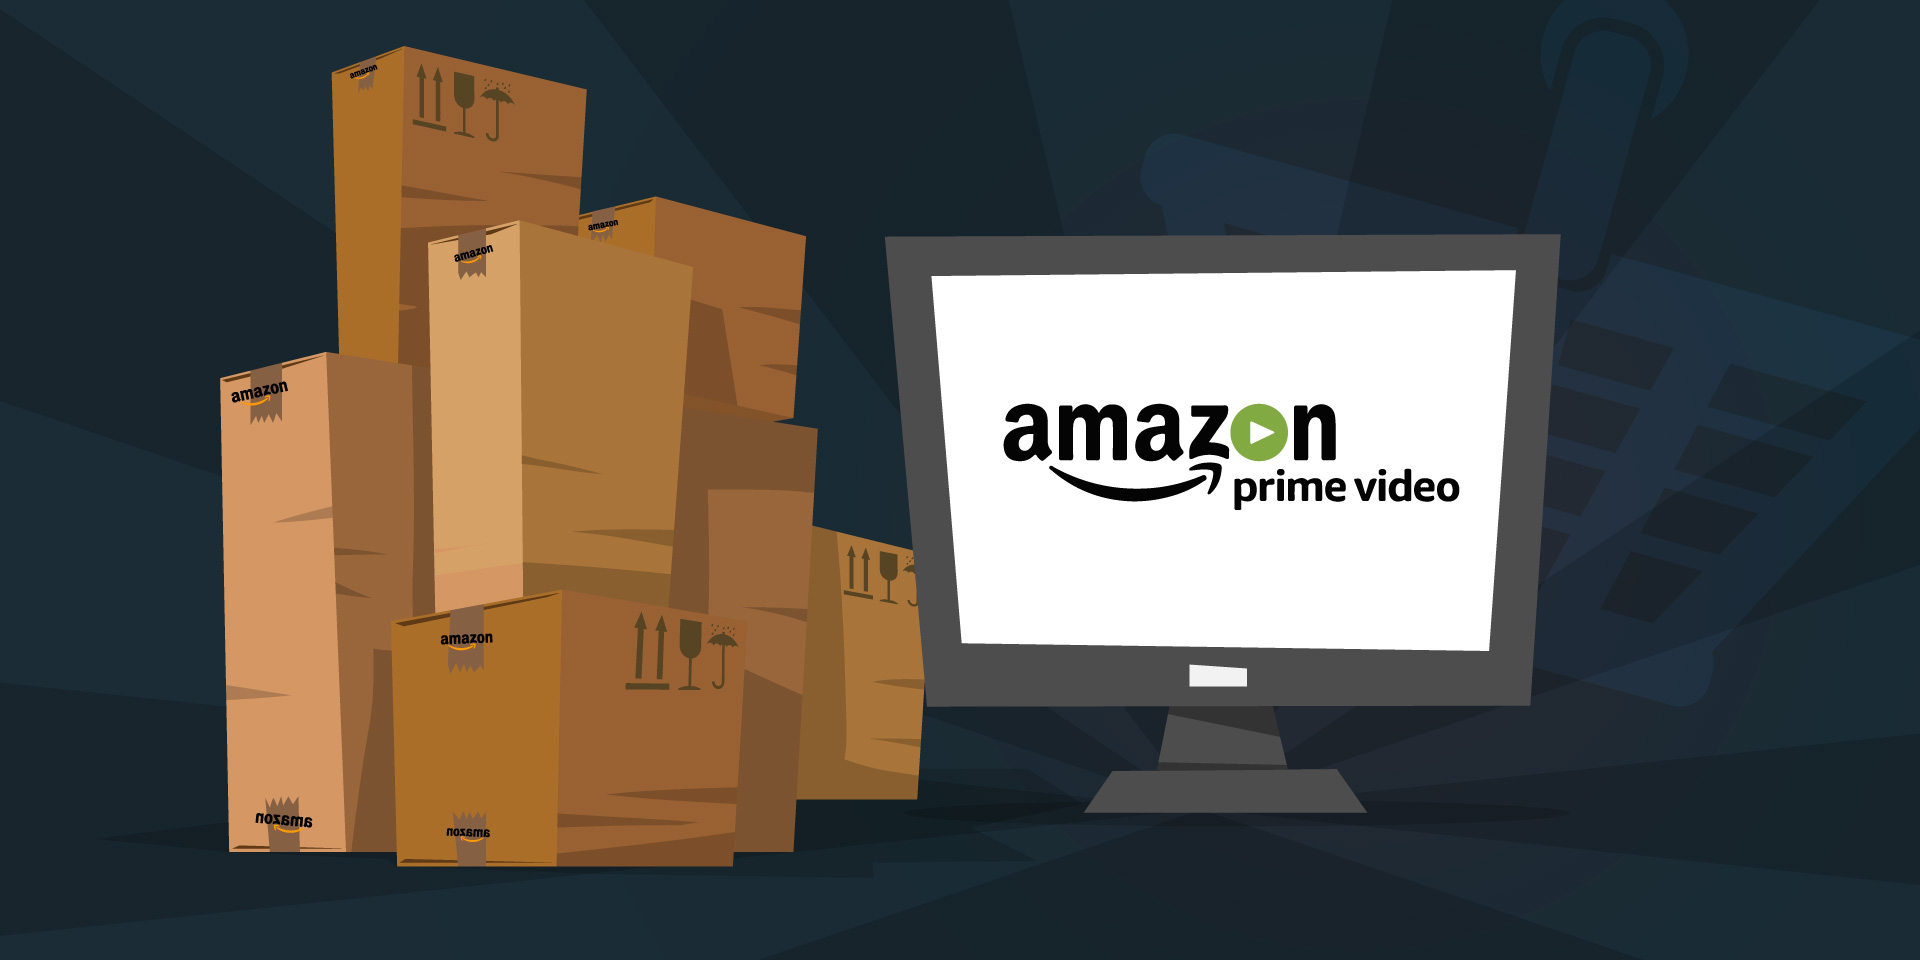 Among the 200 territories where Amazon has launched Prime, India’s growth has been the highest since December 2016